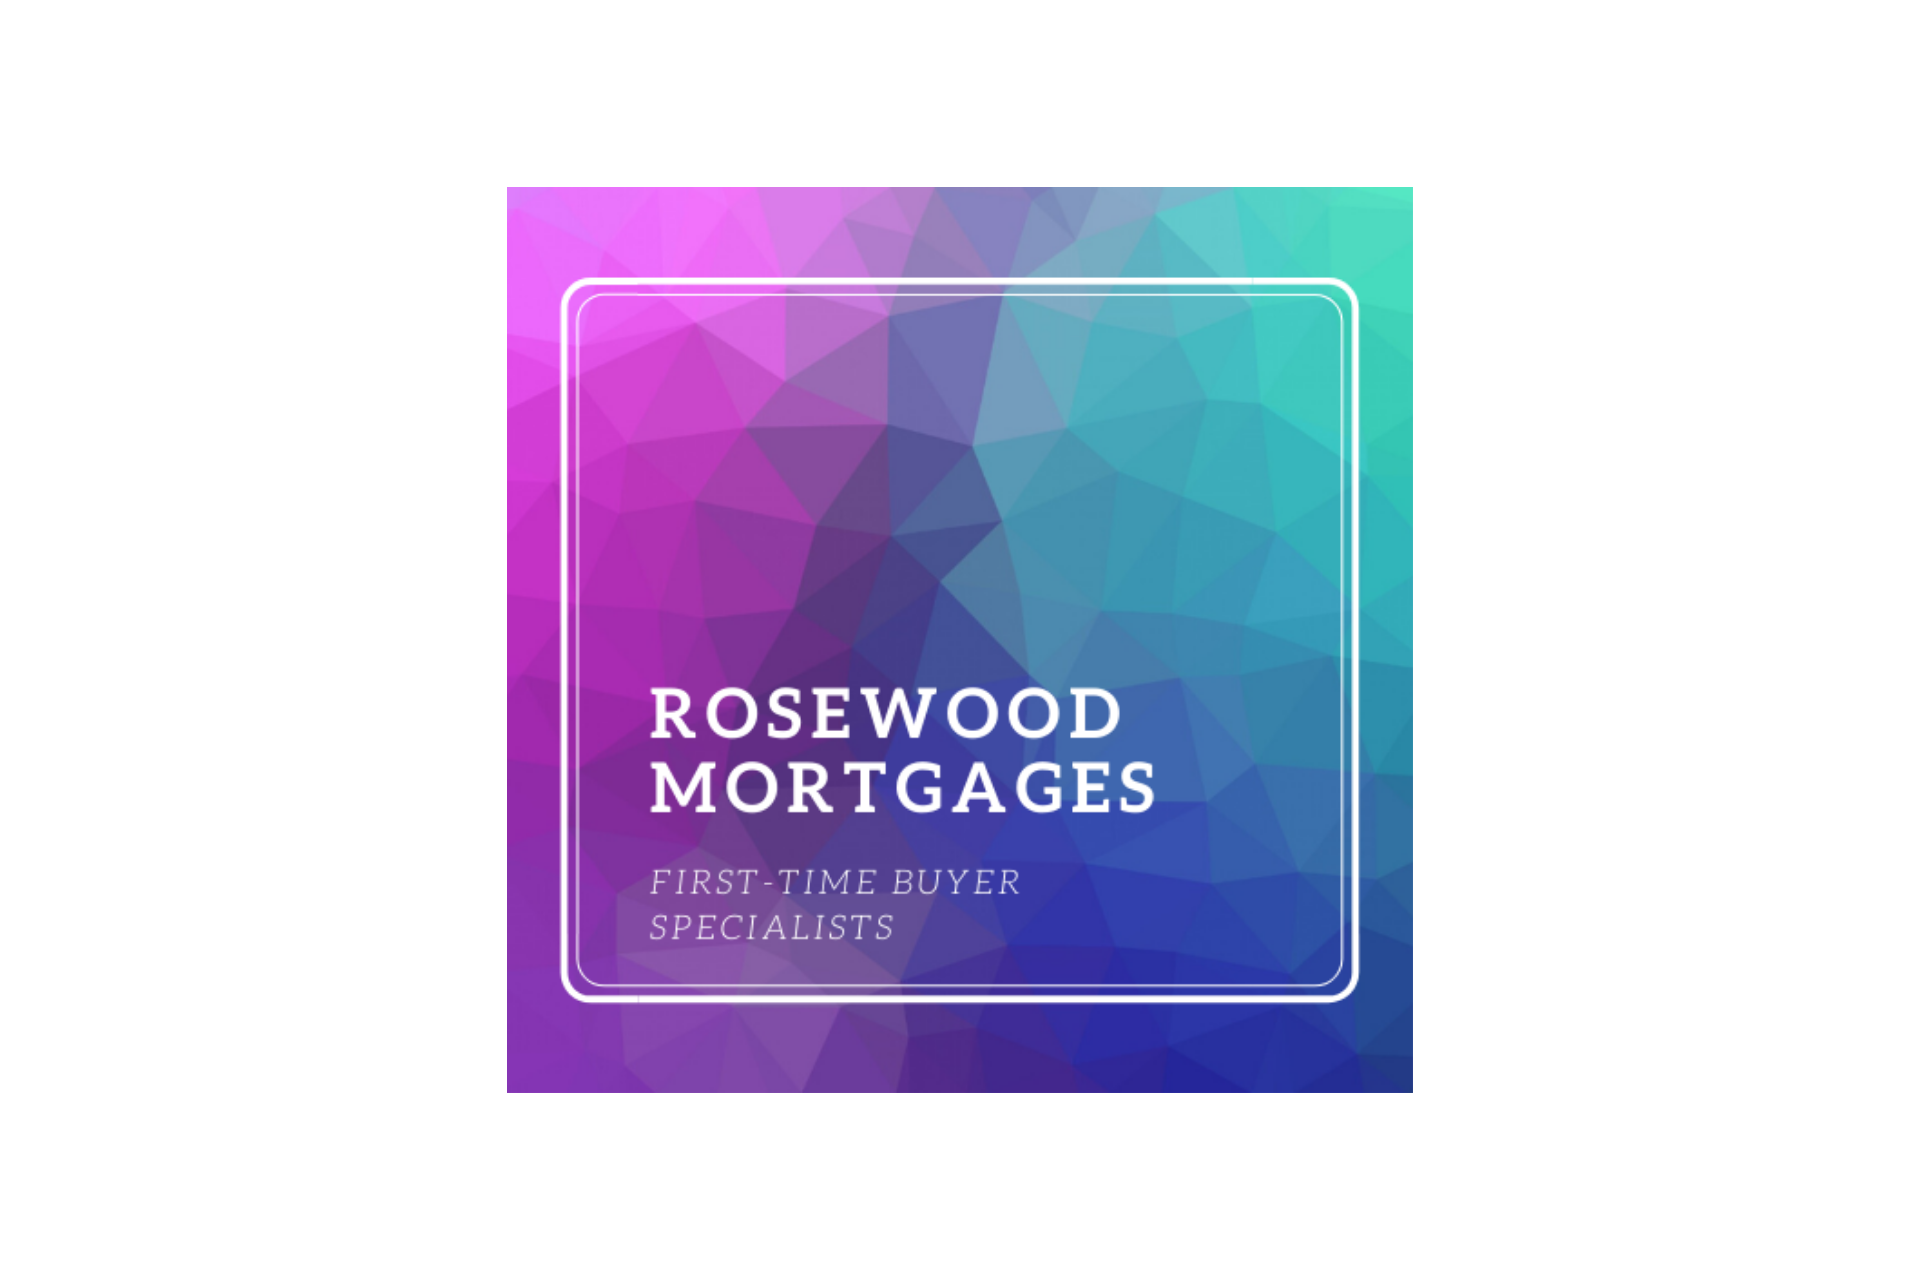 Rosewood Mortgages